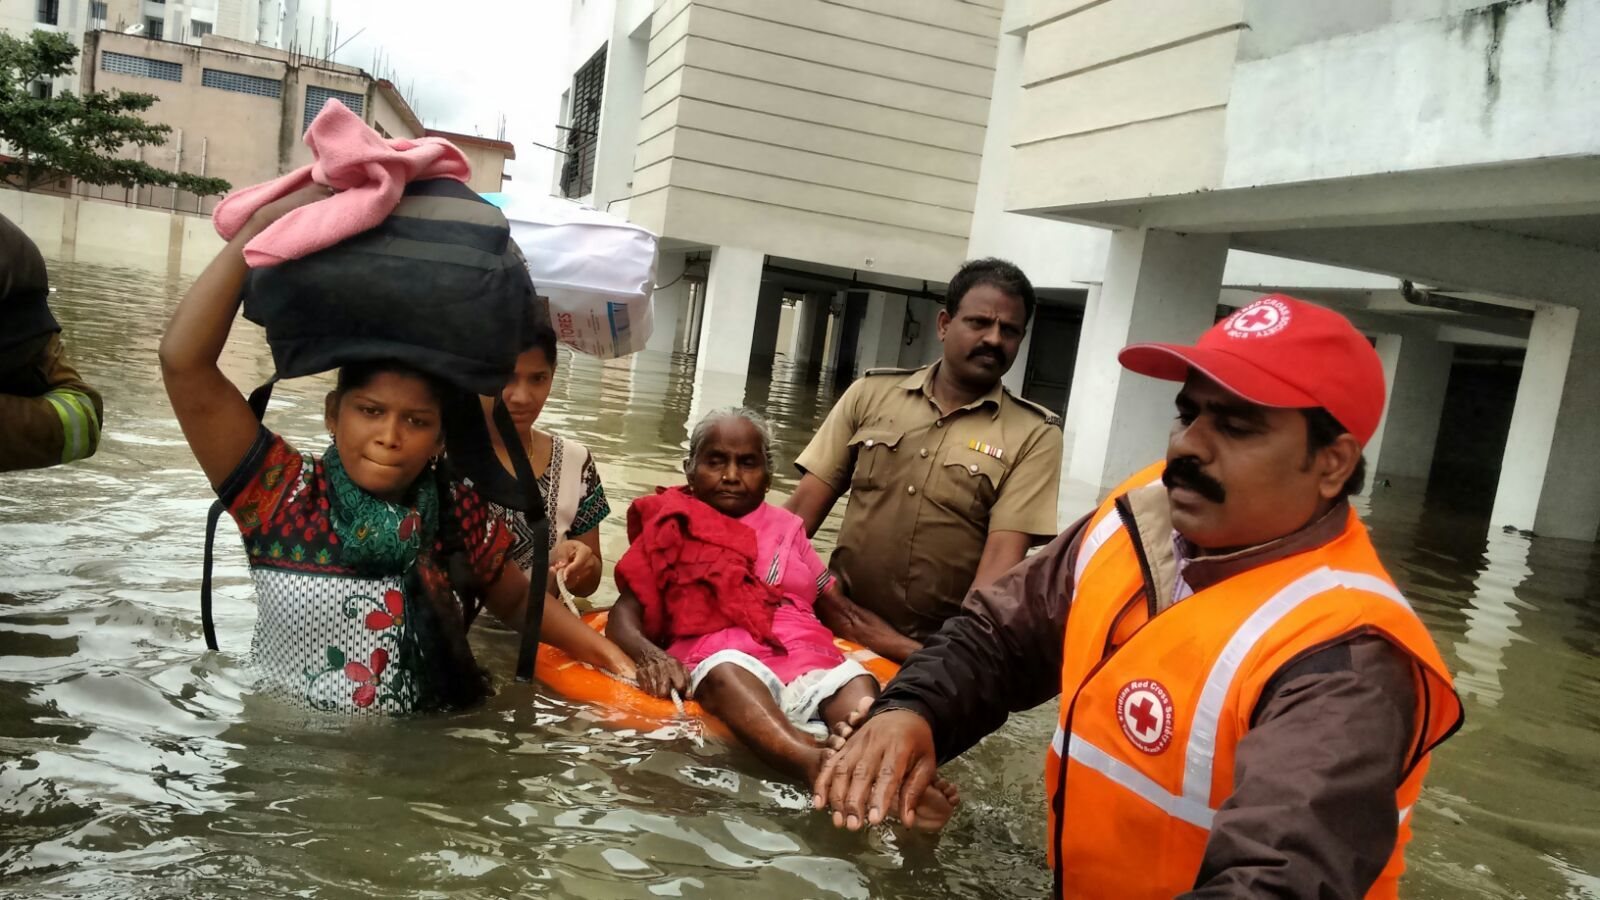 A family being helped by the Red Cross during the floods of South India in 2015